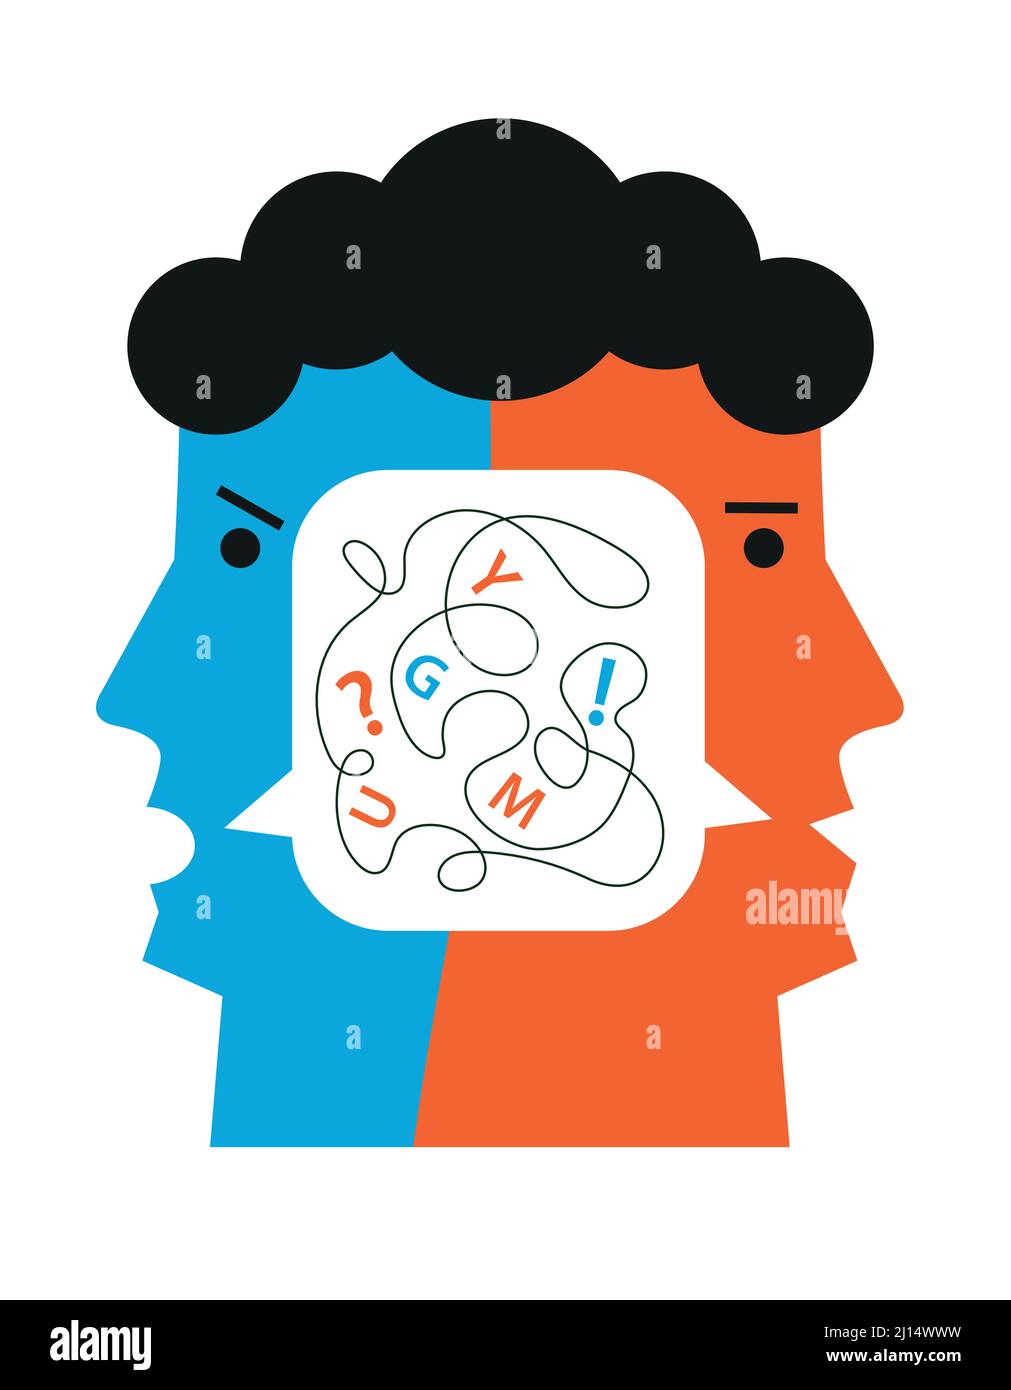 Schizophrenia,bipolar disorder, male head silhouettes. Illustration of Stylized Male Head with speech bubble inside. Vector available. Stock Vector